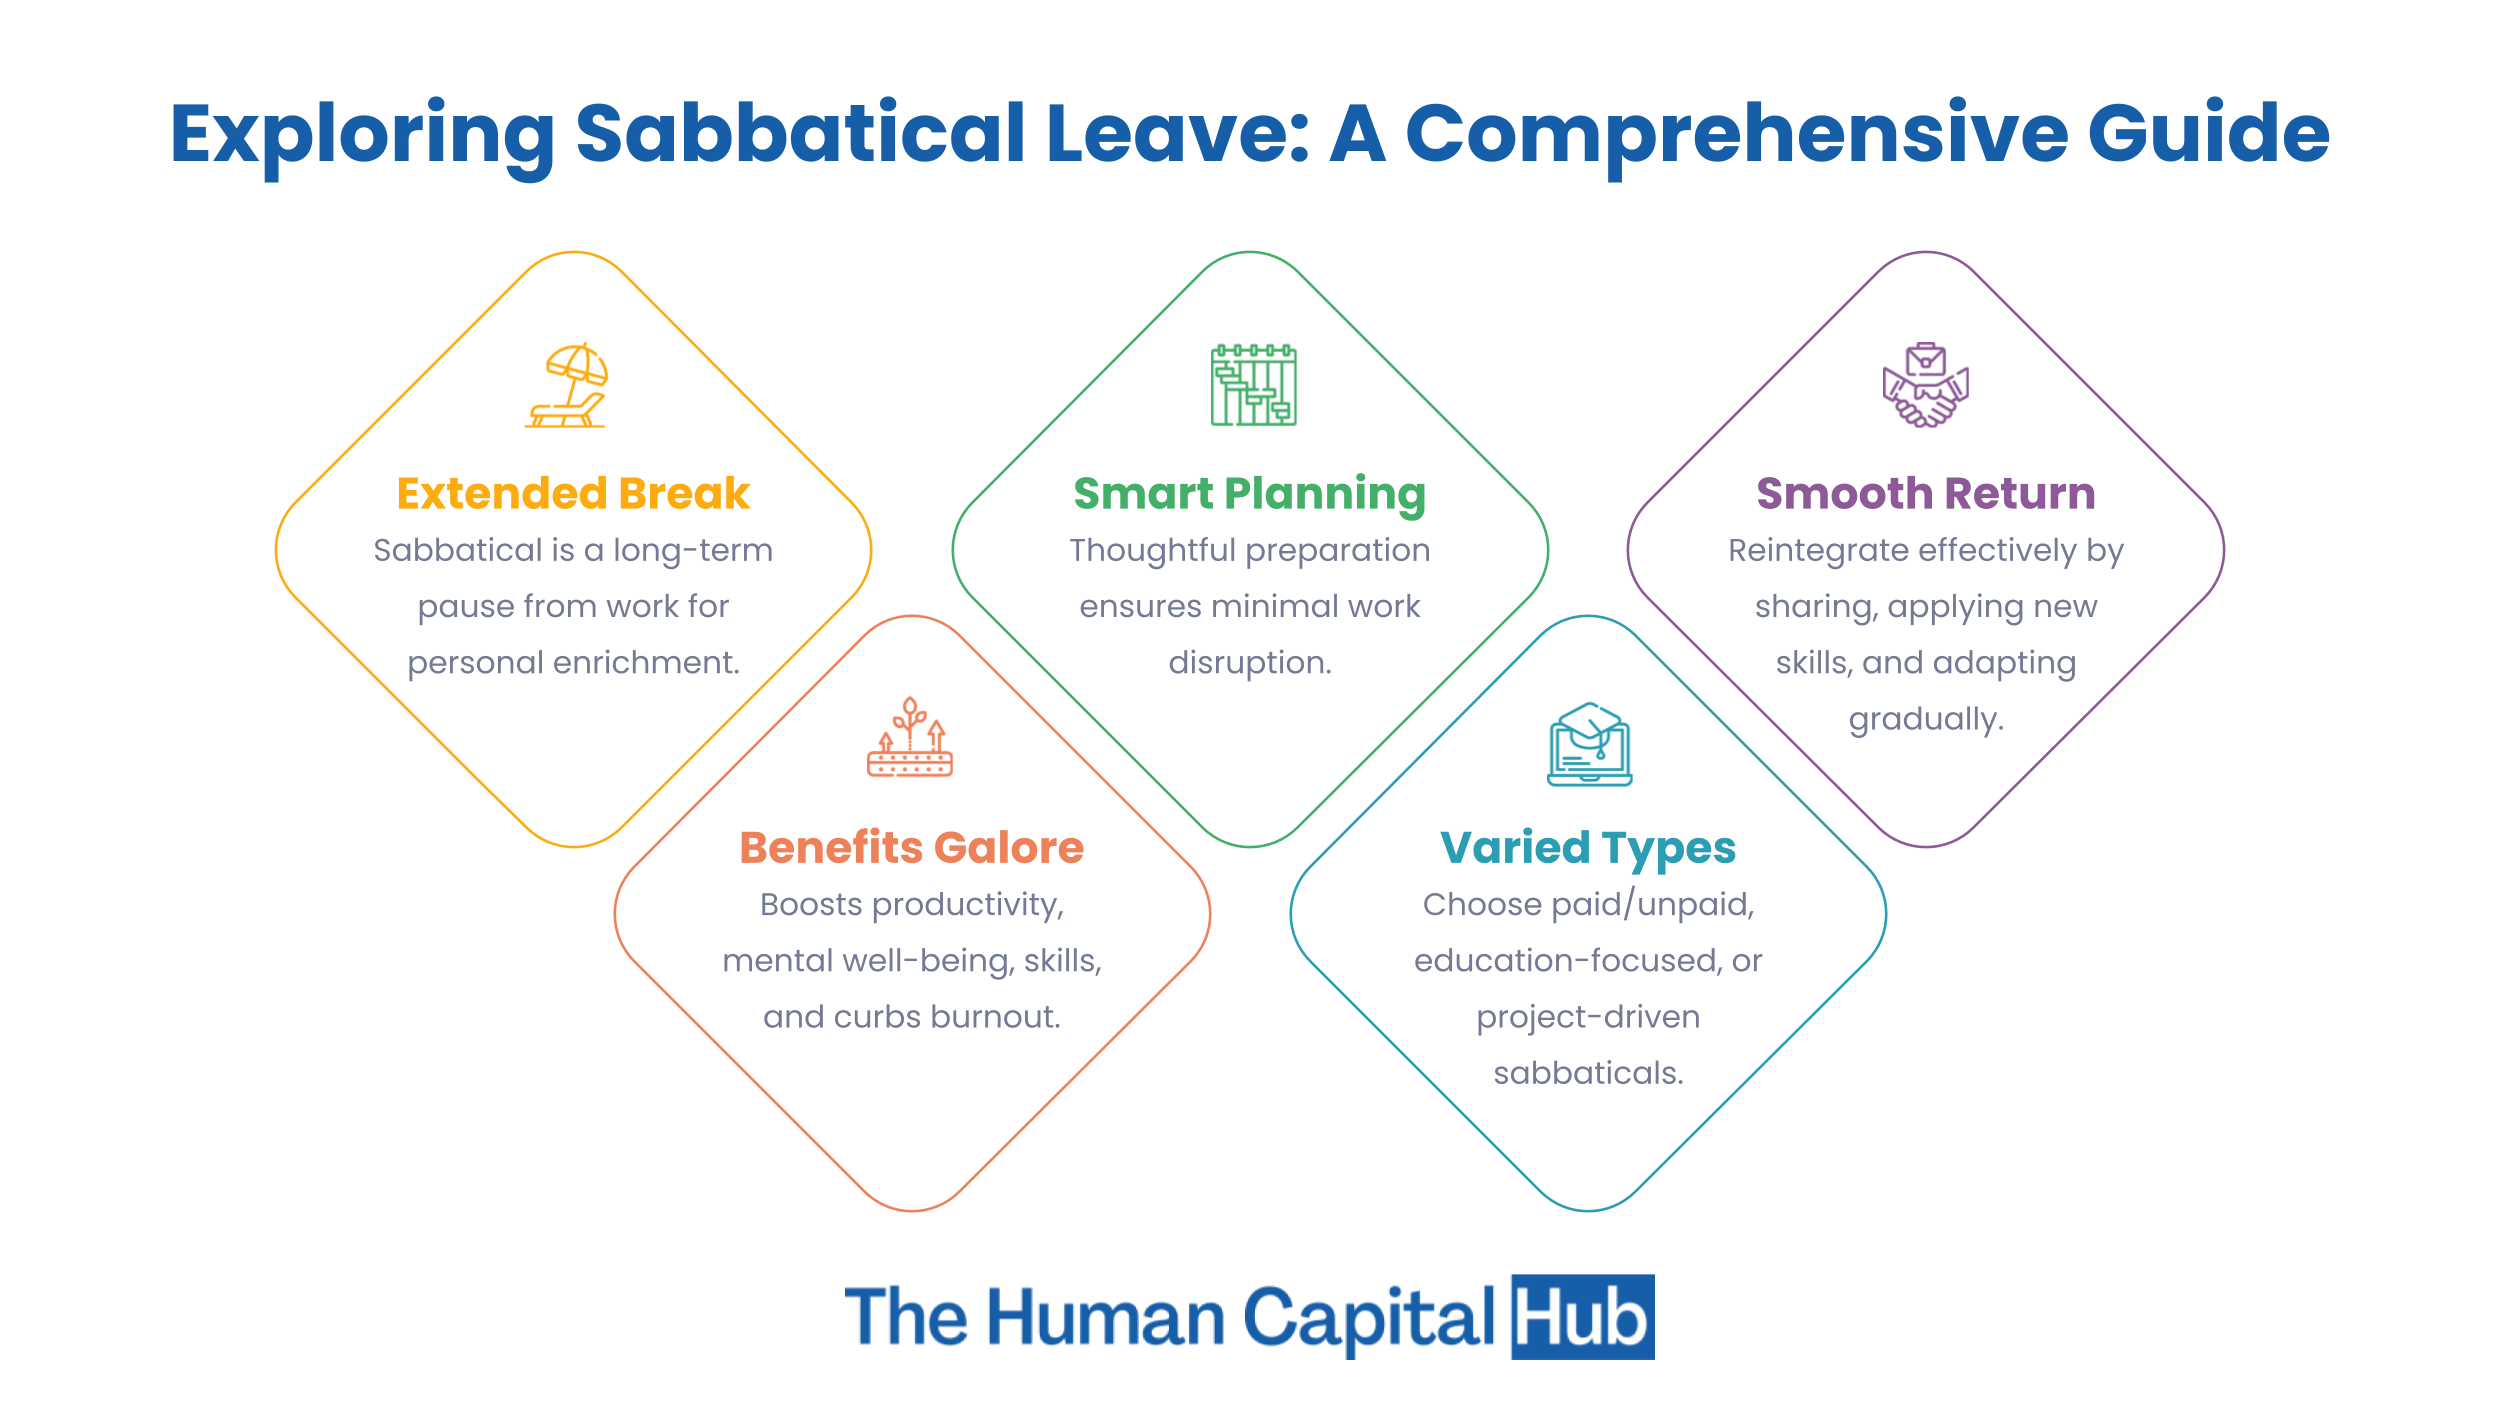 What Is Sabbatical Leave?